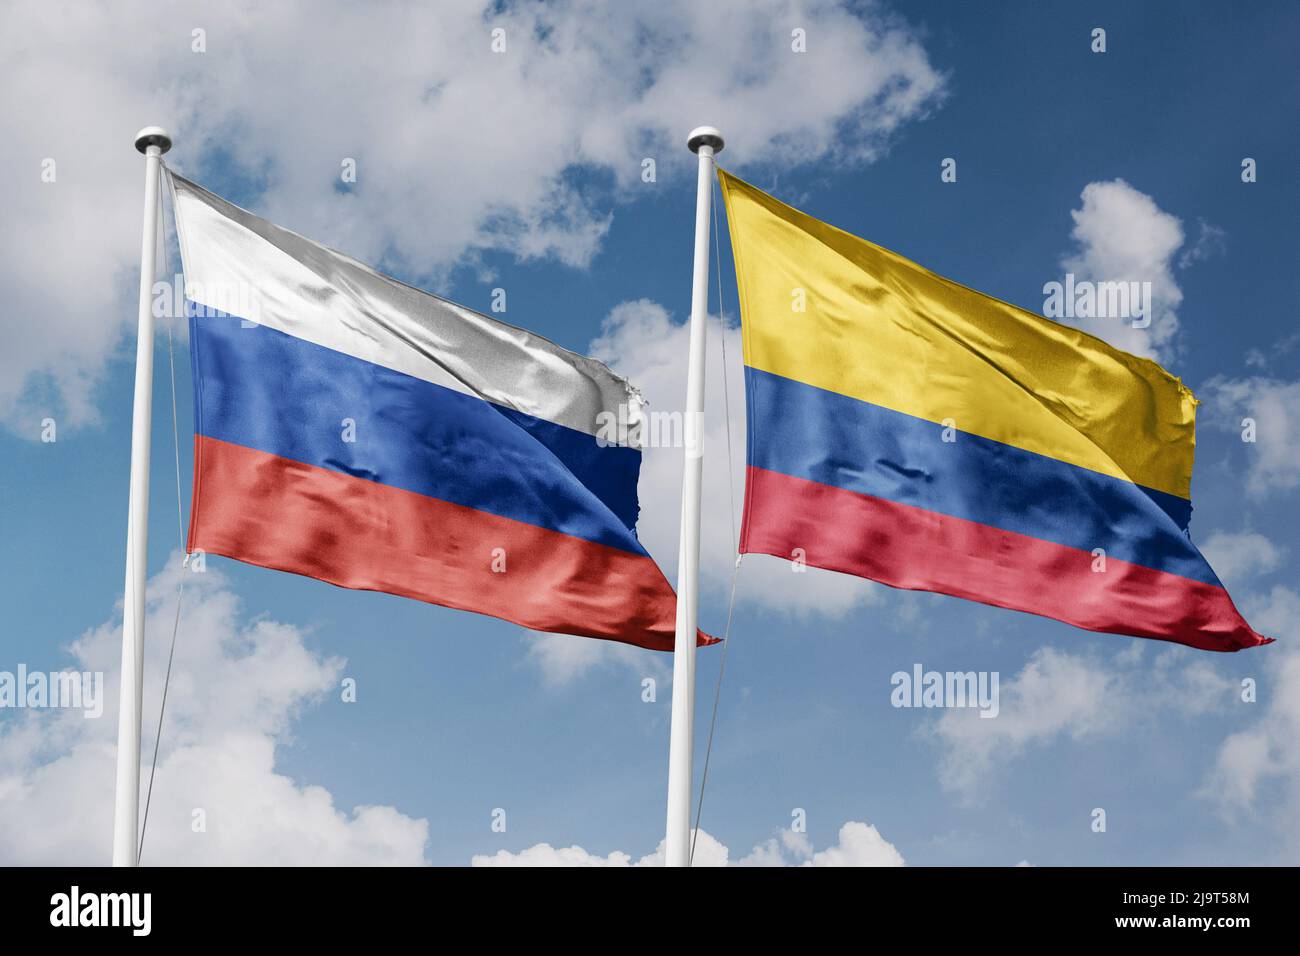 Russia and Colombia two flags on flagpoles and blue cloudy sky background Stock Photo